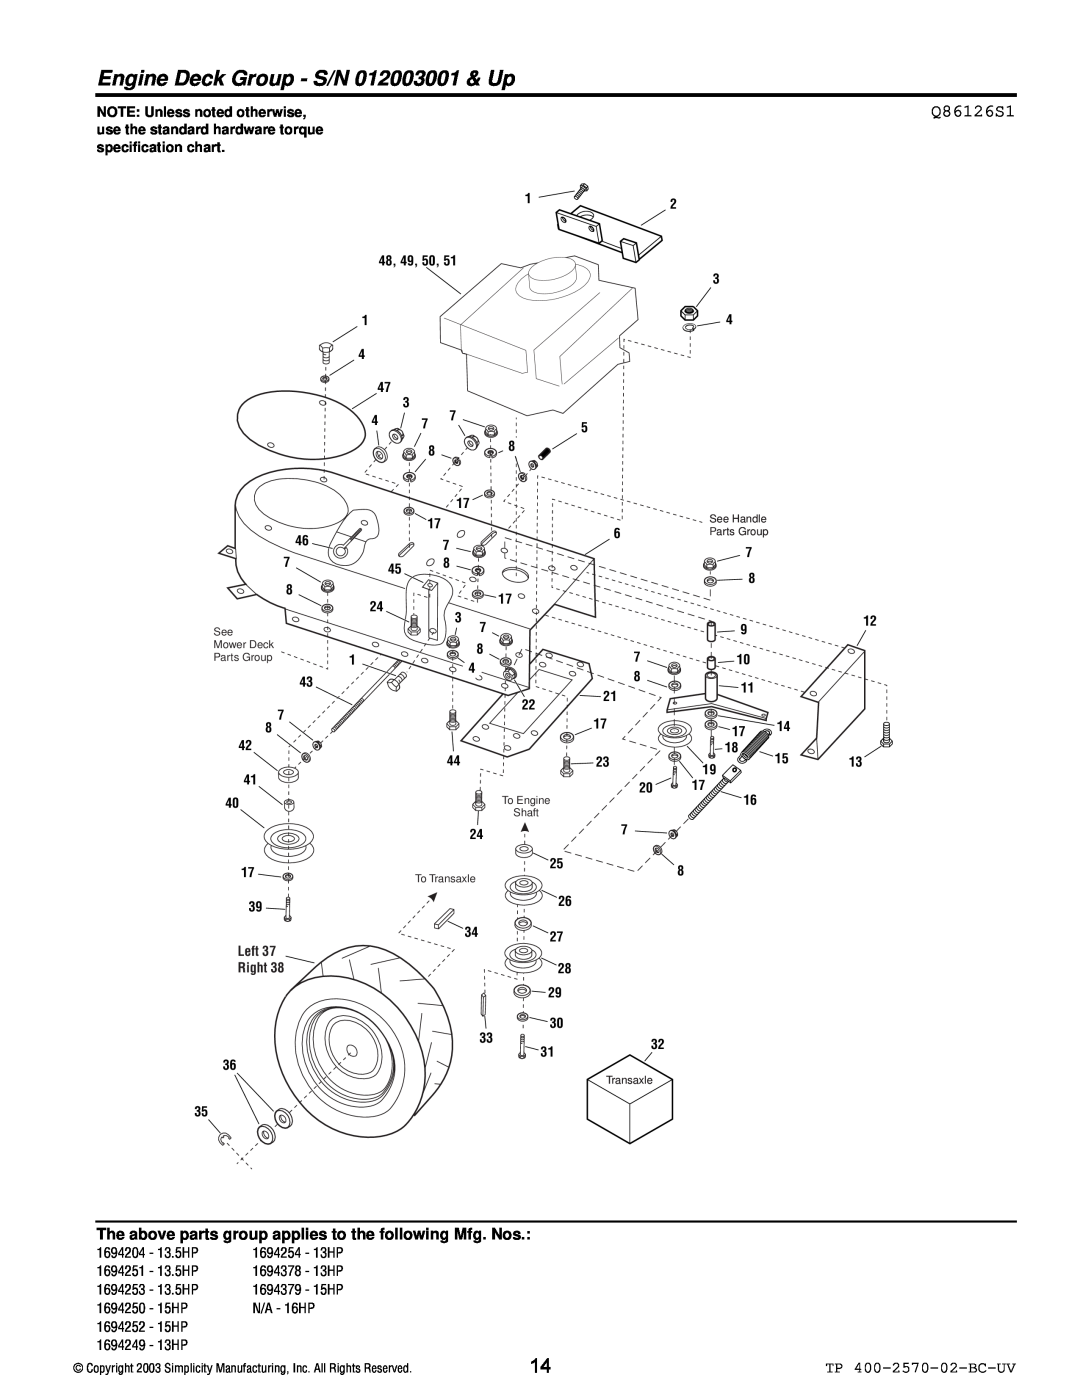 Simplicity 15HP Engine Deck Group - S/N 012003001 & Up, Q86126S1, The above parts group applies to the following Mfg. Nos 